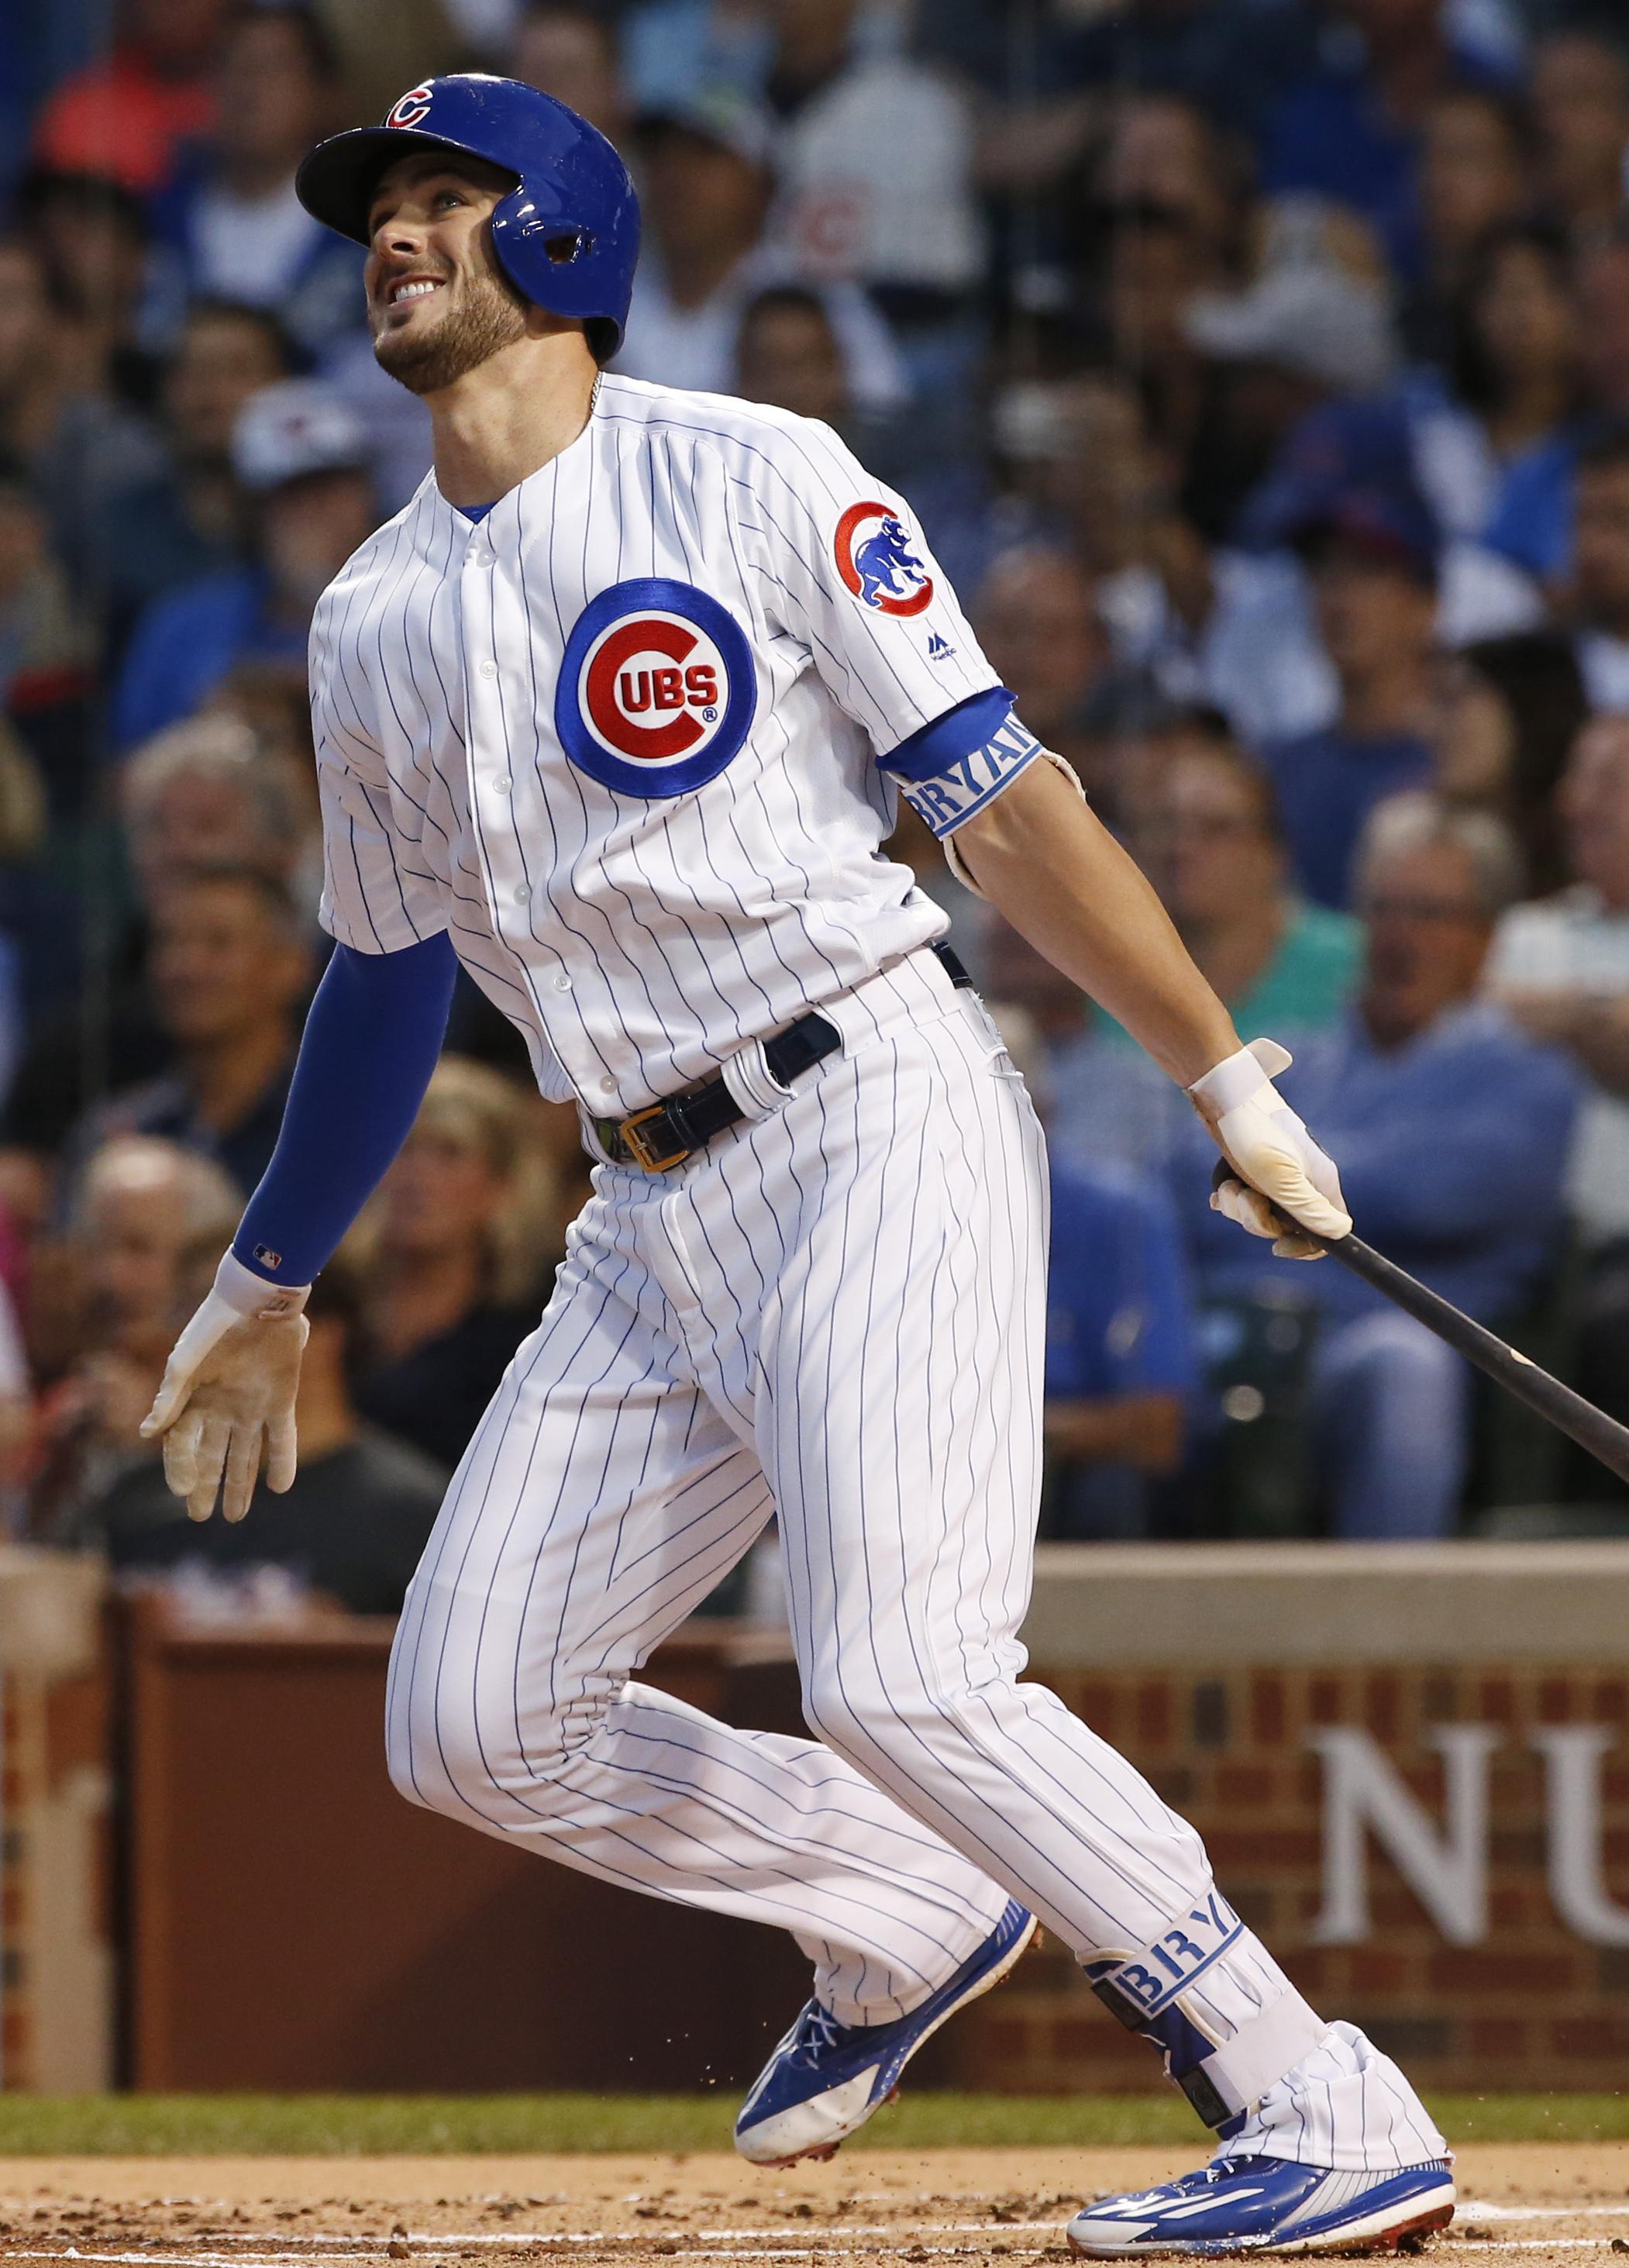 Kris Bryant of the Chicago Cubs looks on against the New York Mets